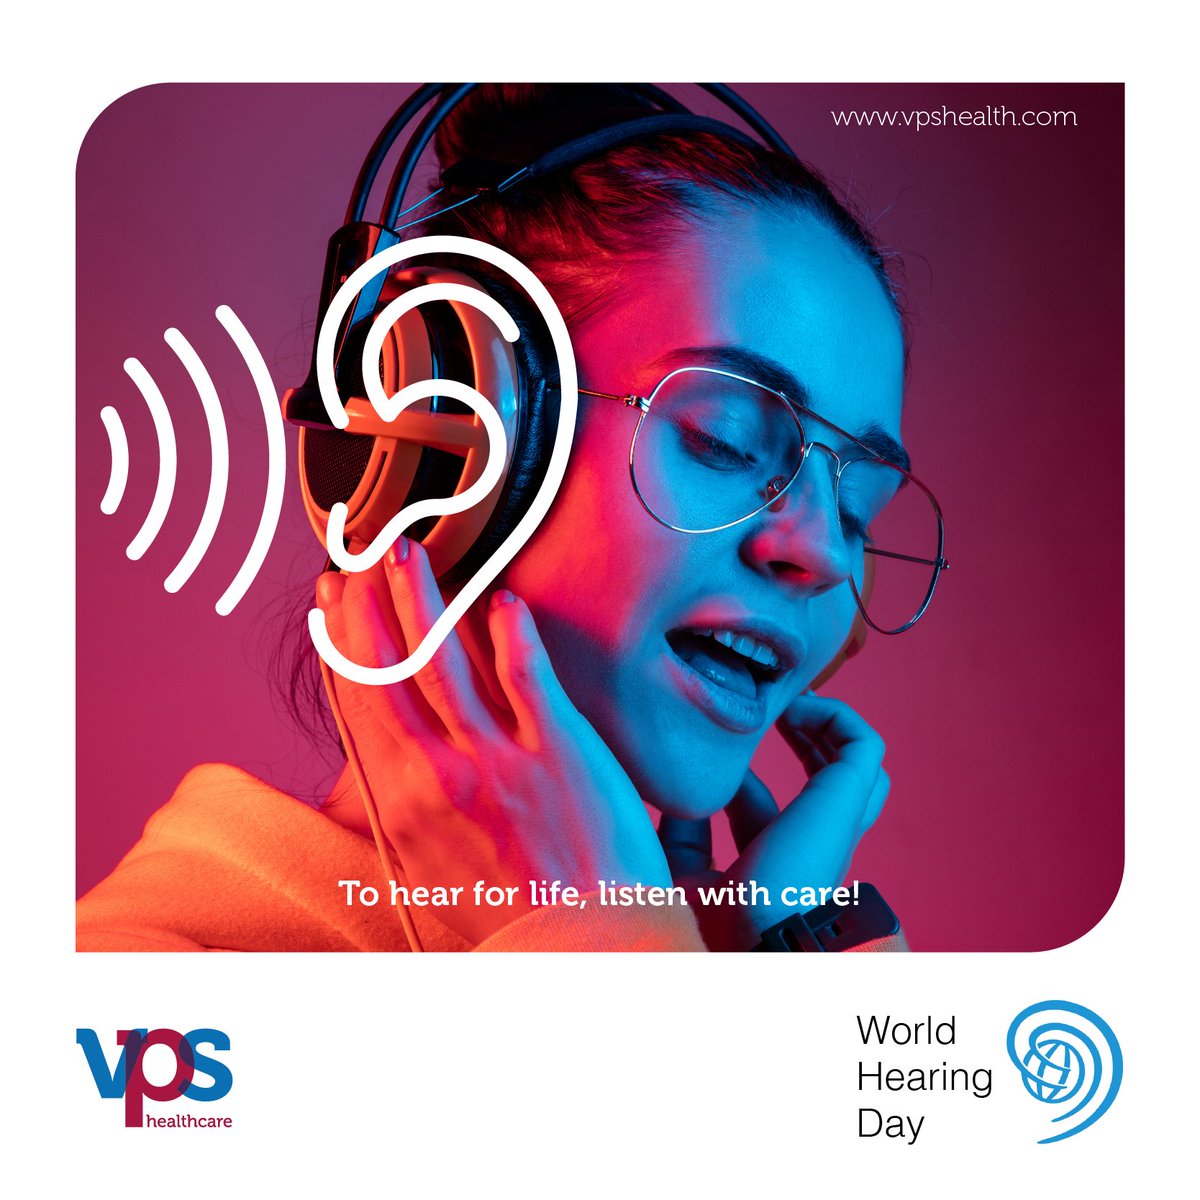 Hearing loss is a condition that many silently suffer. On this World Hearing Day, let us strive to promote hearing care by encouraging our loved ones to seek timely help. Schedule a hearing evaluation today! 

#worldhearingday #vpshealthcare